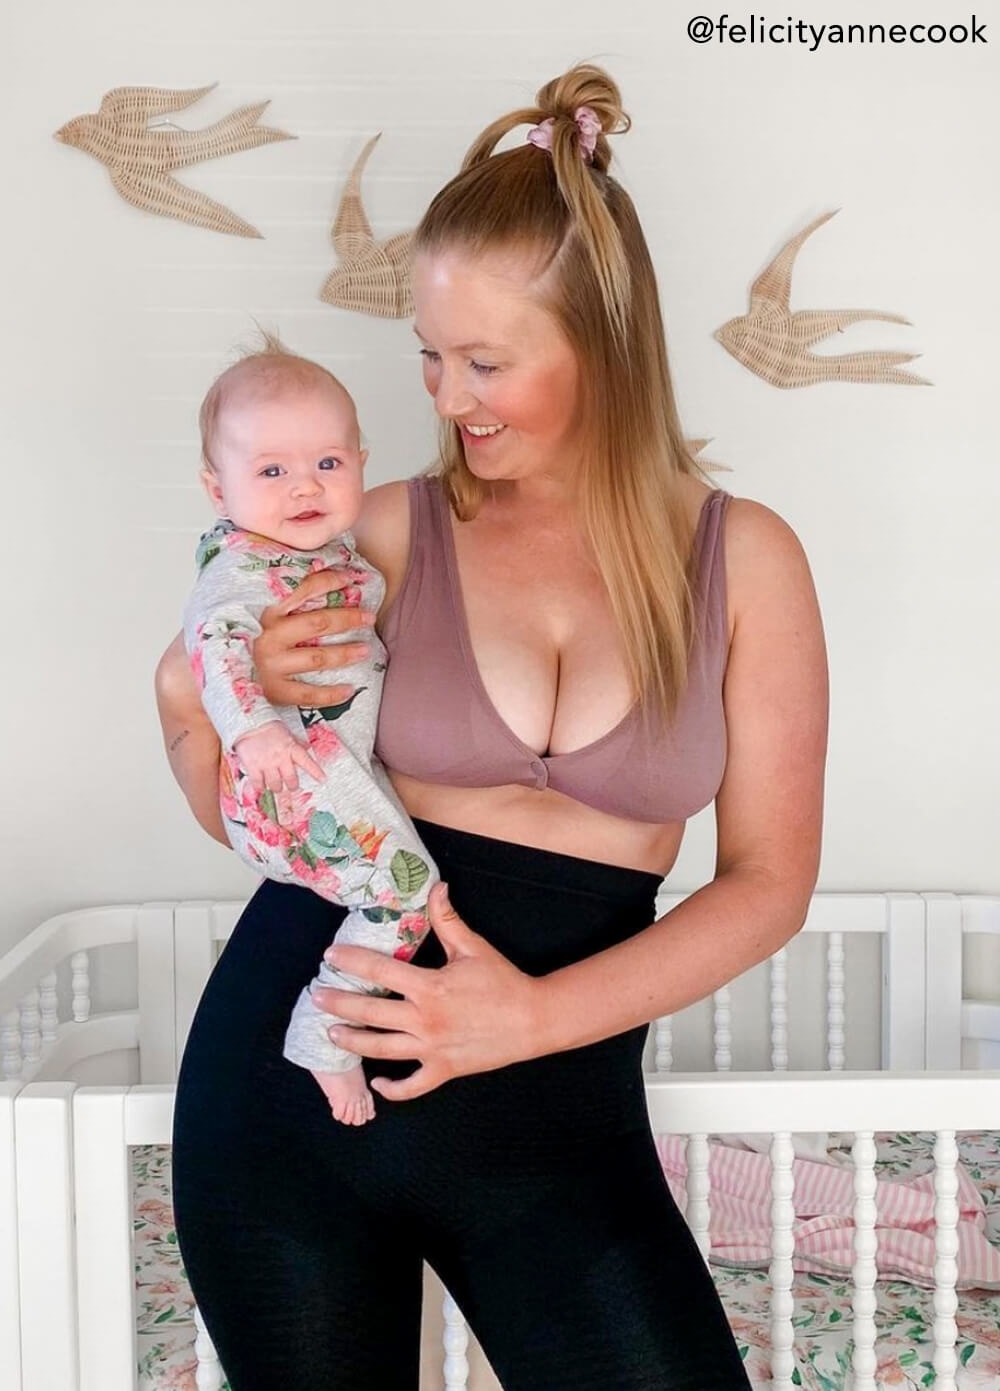 Maternity And More - Nursing Sleep Bra from Seraphine Maternity is